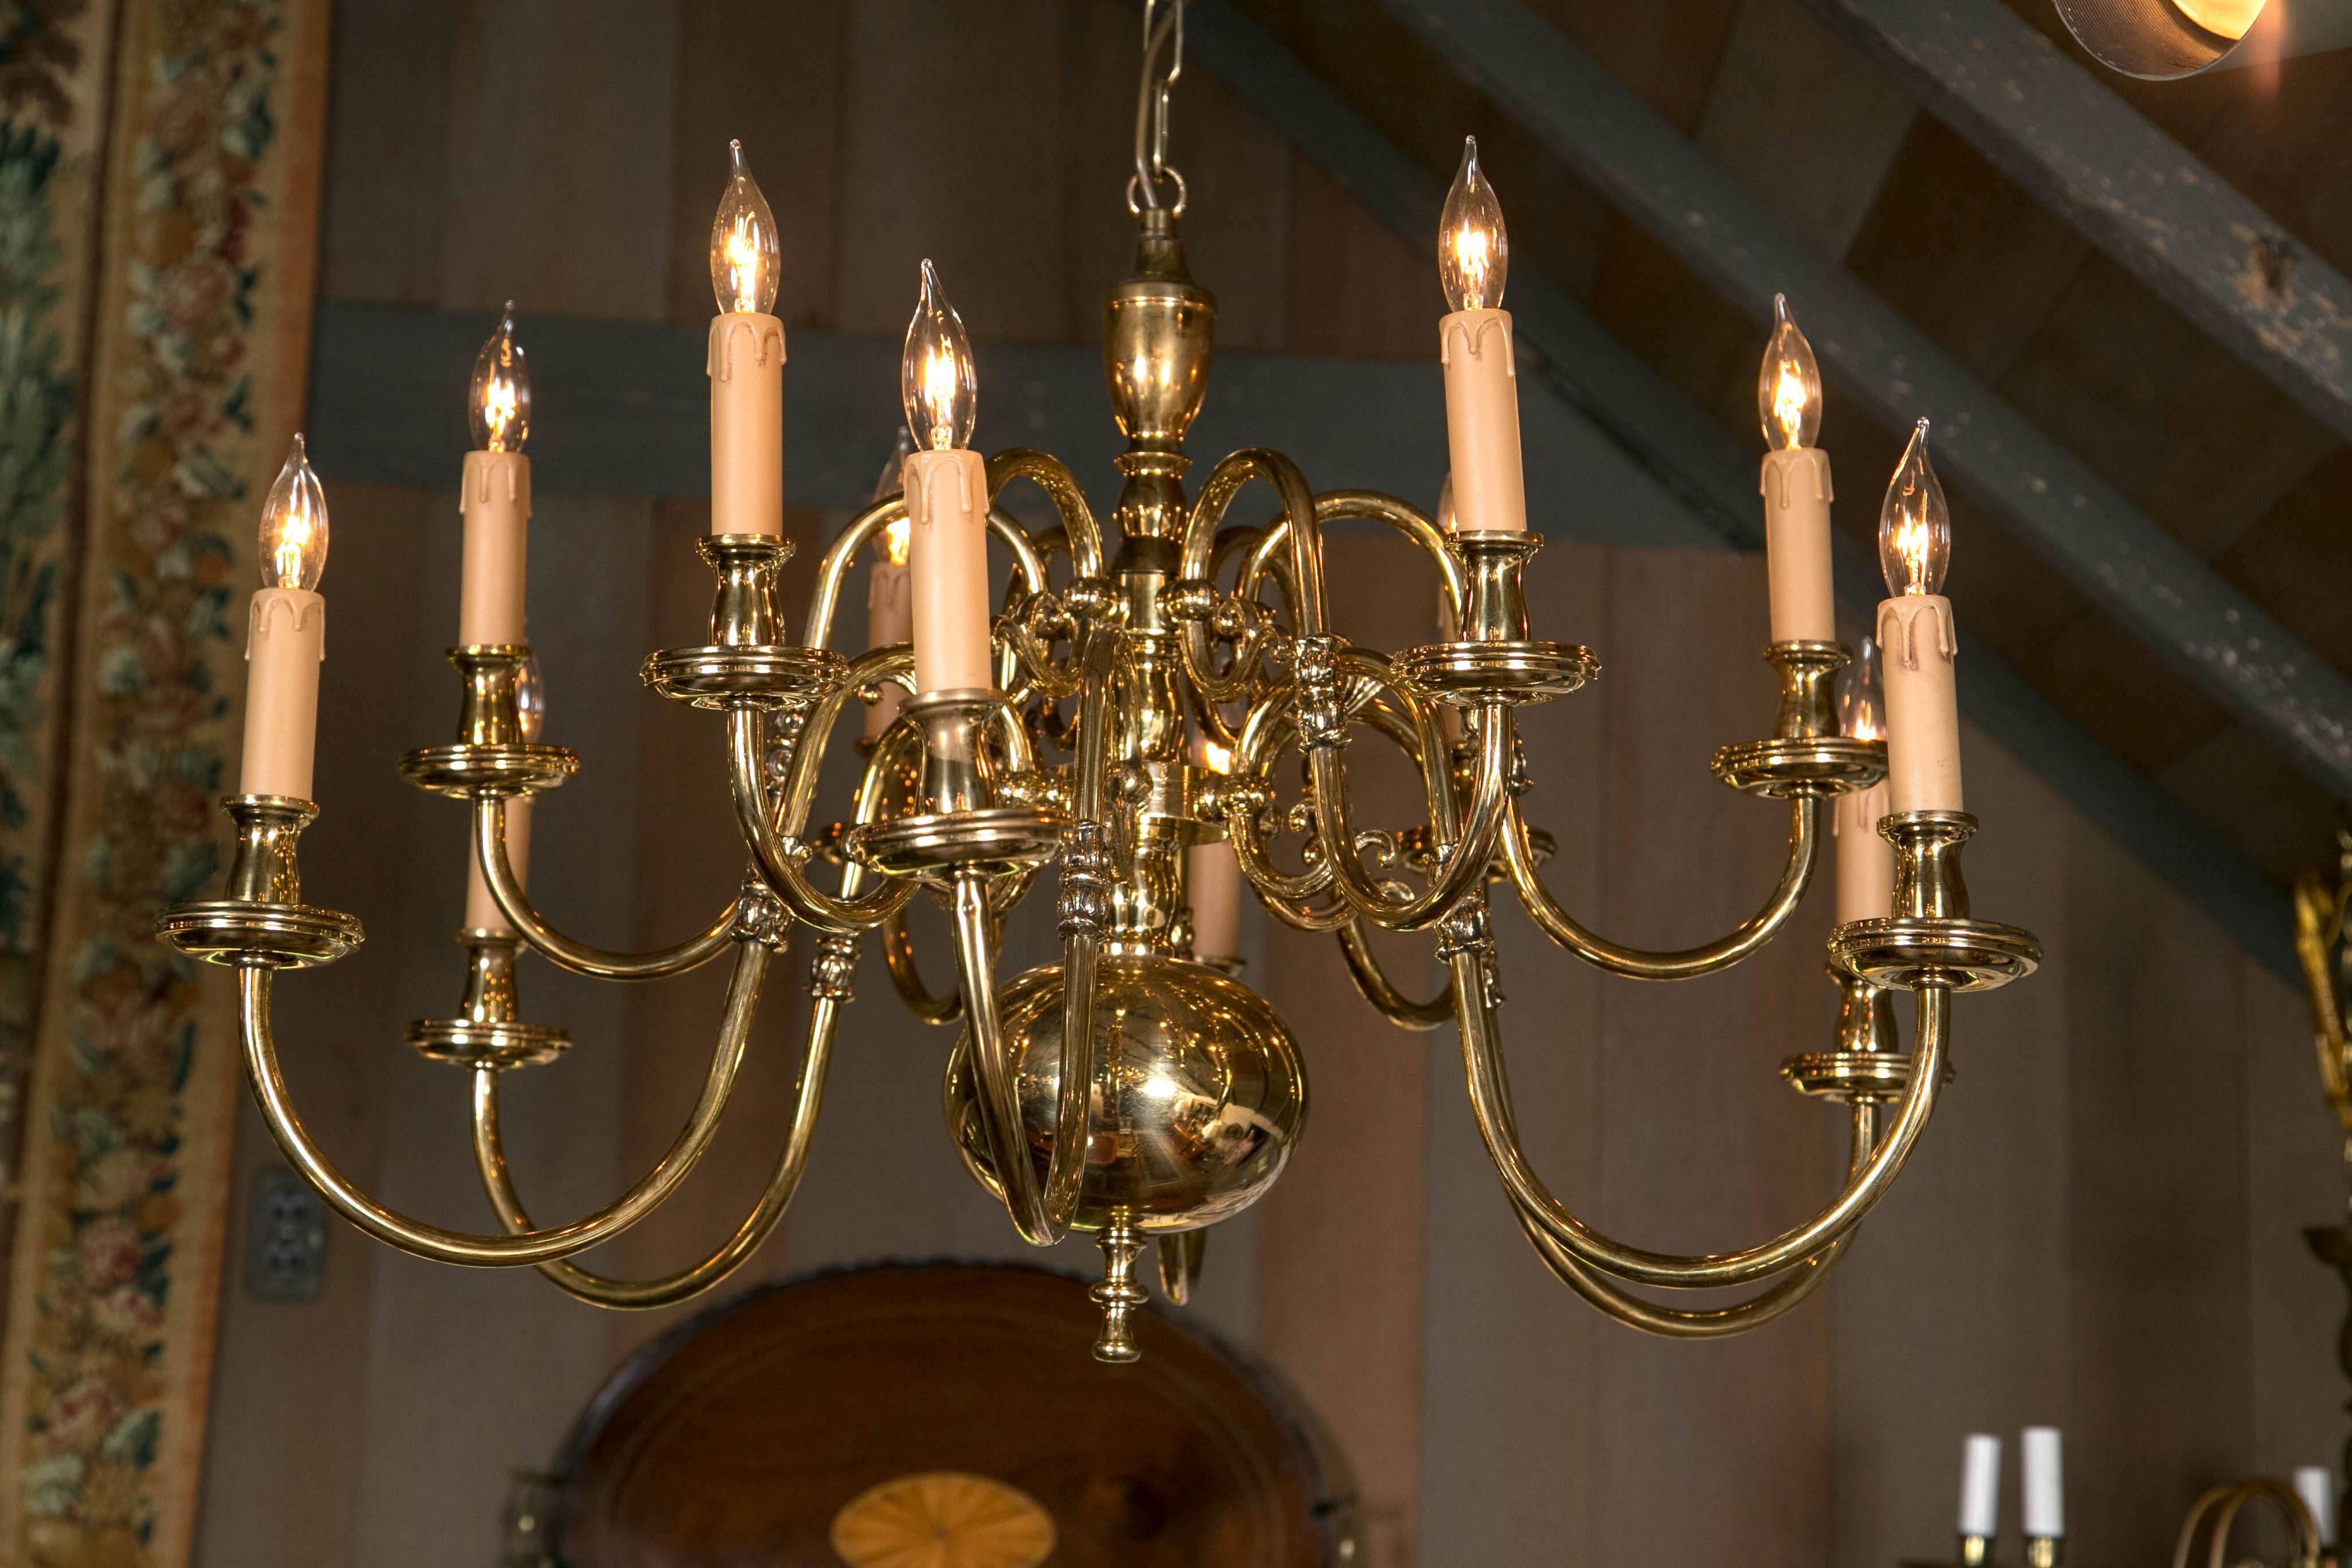 Twelve arms in a six-over-six arrangement and connected to a turned center support create a sparkling array of curves and angles that keep the eye amused as one arm weaves past the next. Polished, lacquered, and electrified, this chandelier is ready